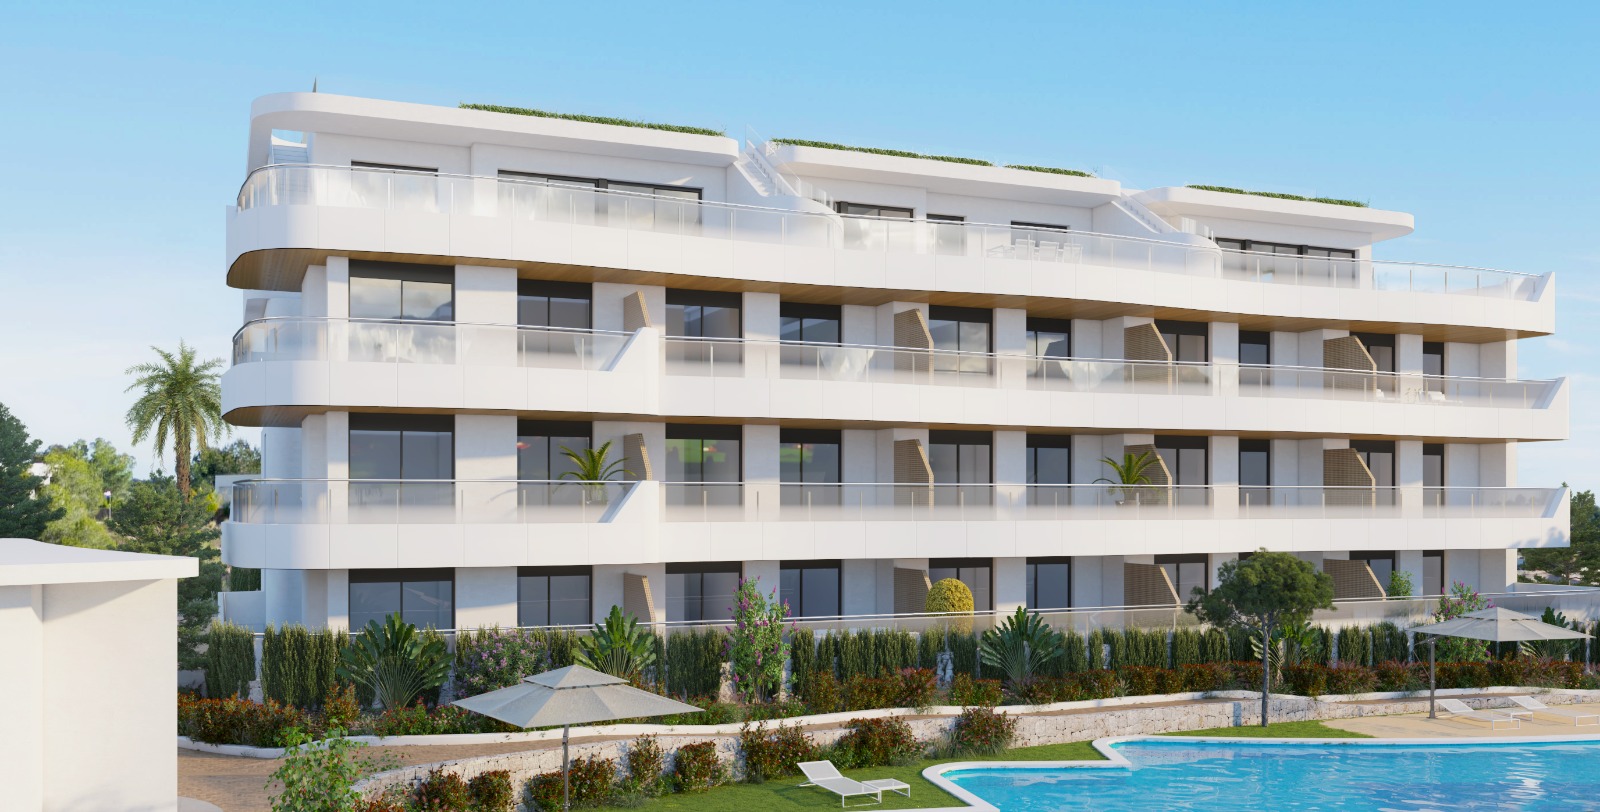 New-built apartments for sale in the heart of Playa Flamenca.